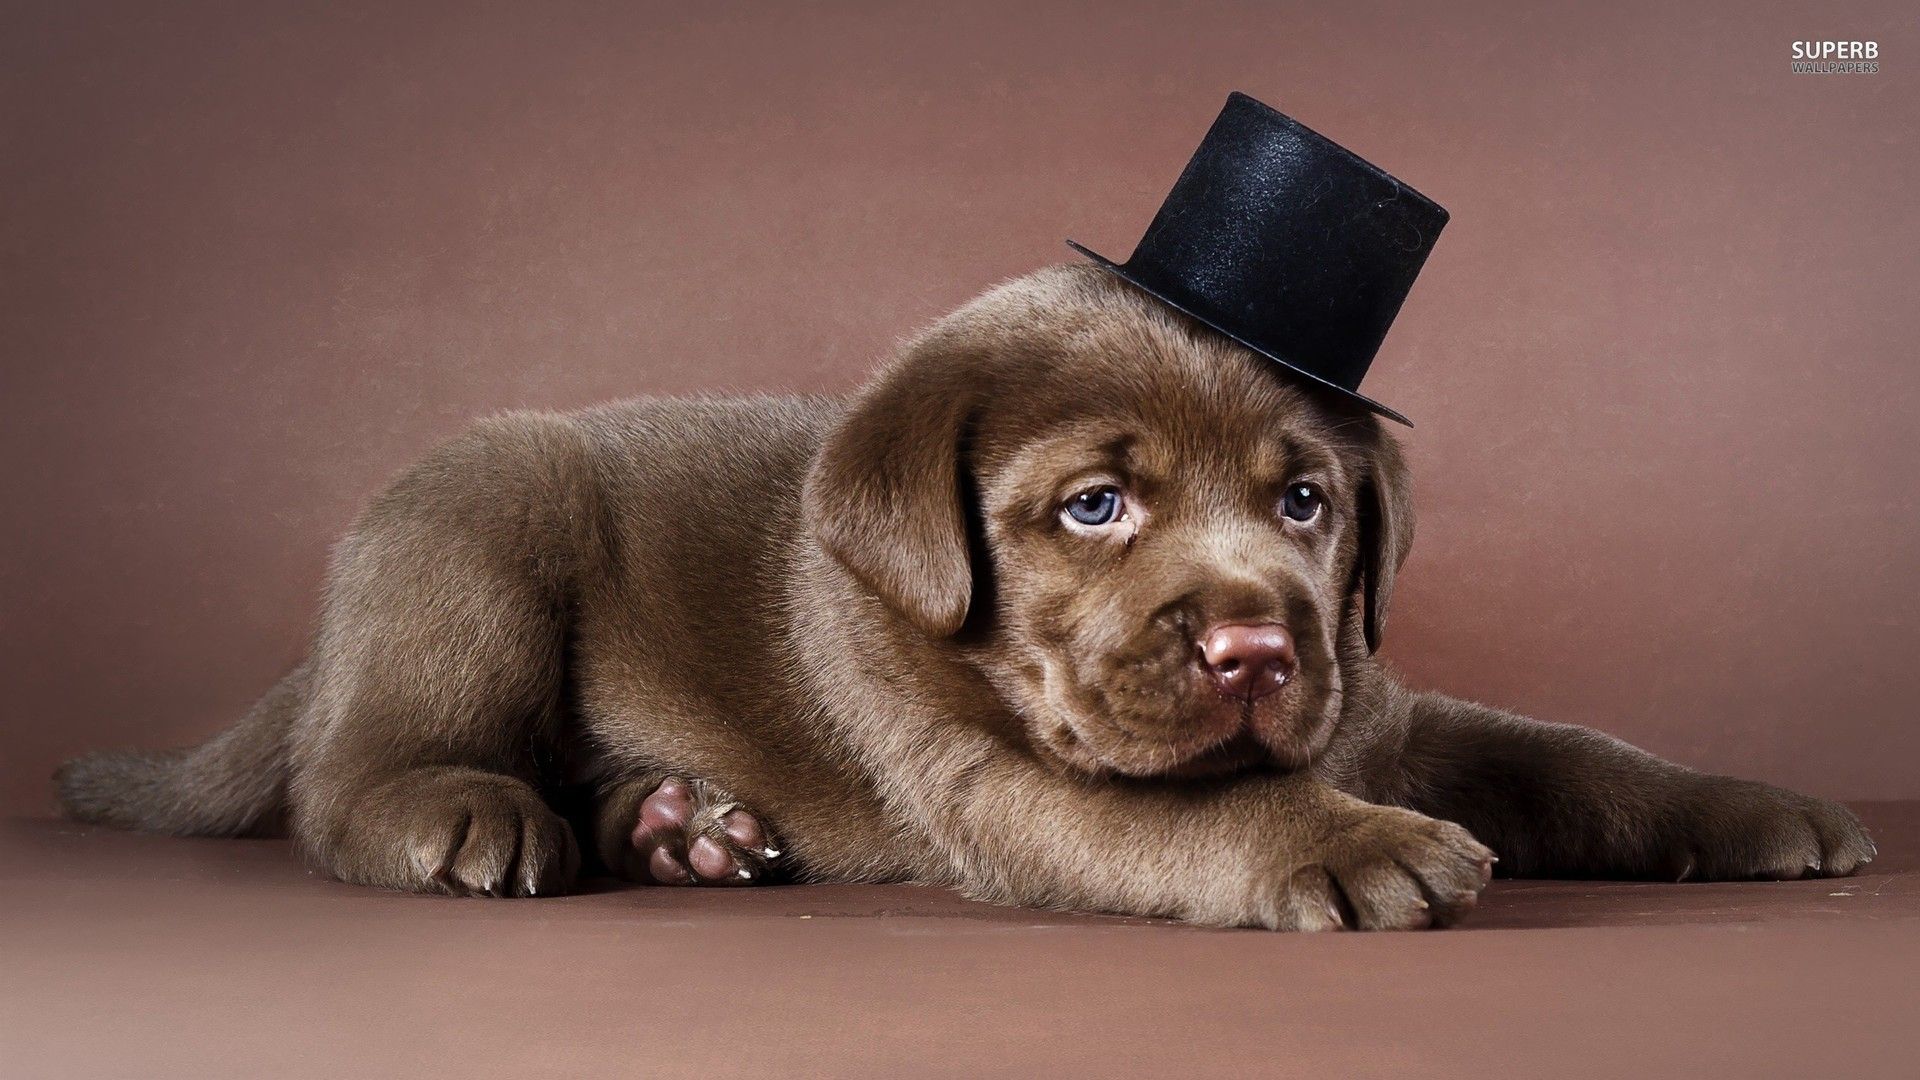 Labrador puppy with a tophat wallpaper - Animal wallpapers - #24526